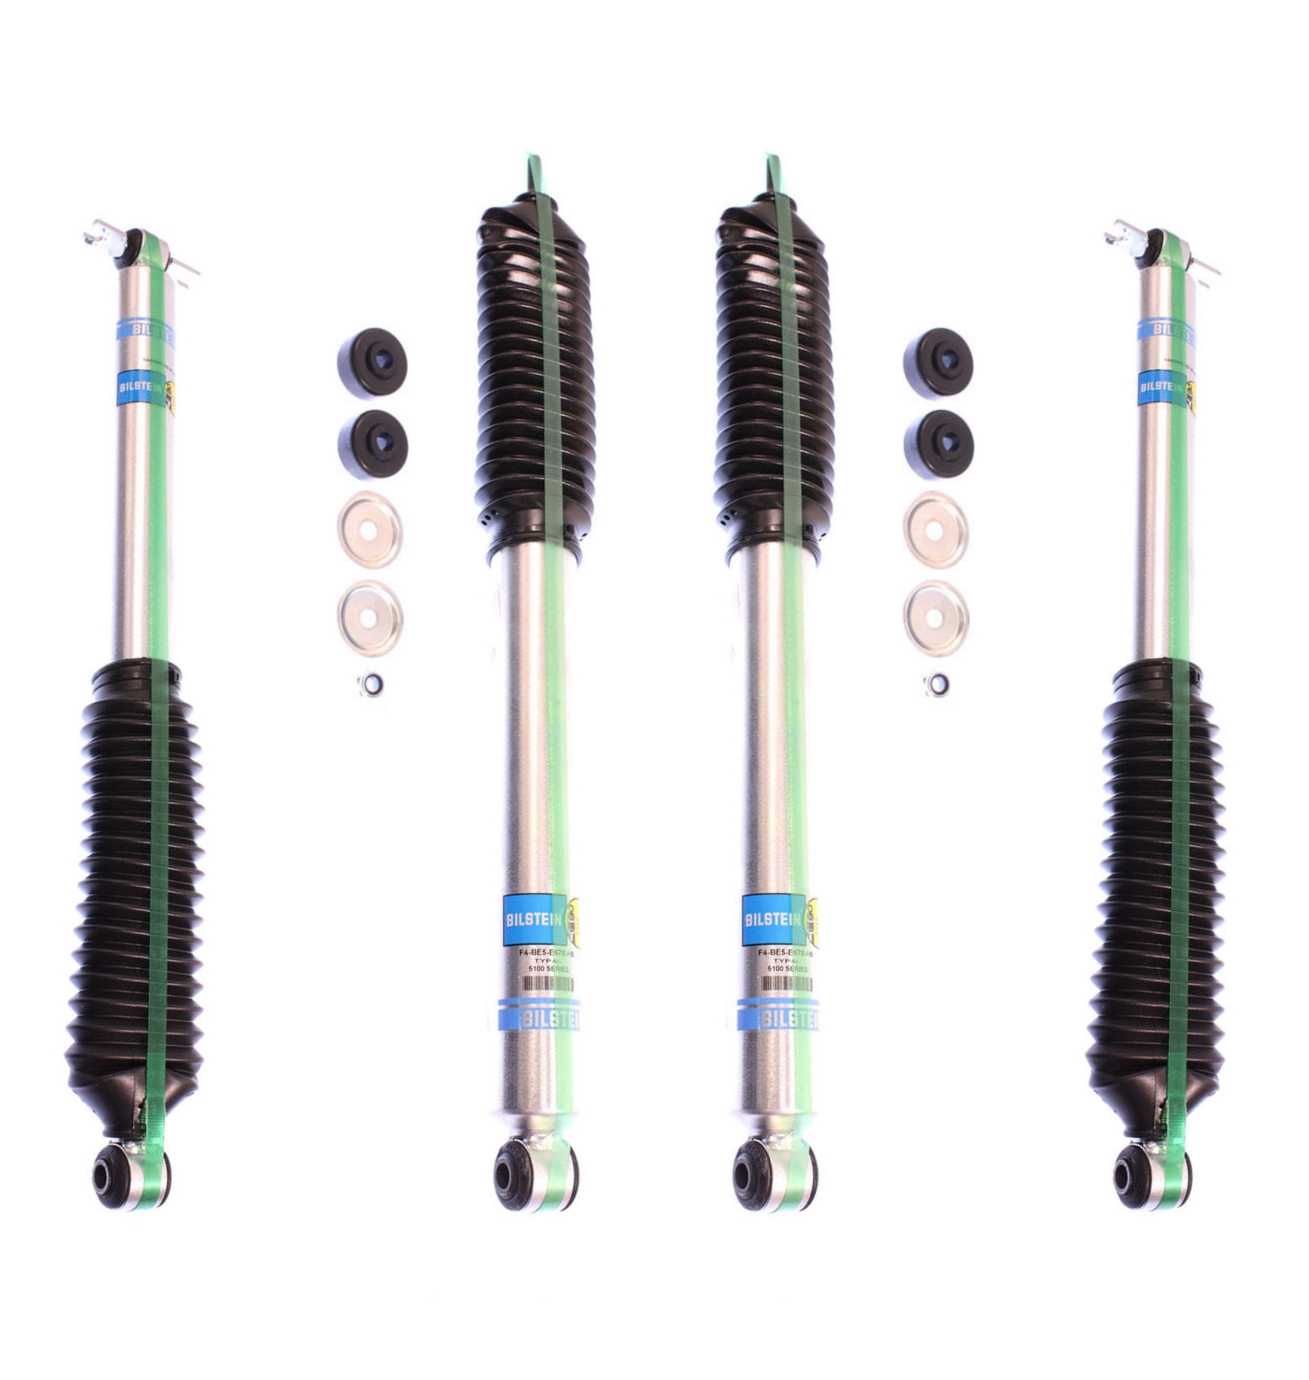 Bilstein B8 5100 Shock Absorber Front Rear L//R 4 Pc for 07-18 Jeep Wrangler 4WD